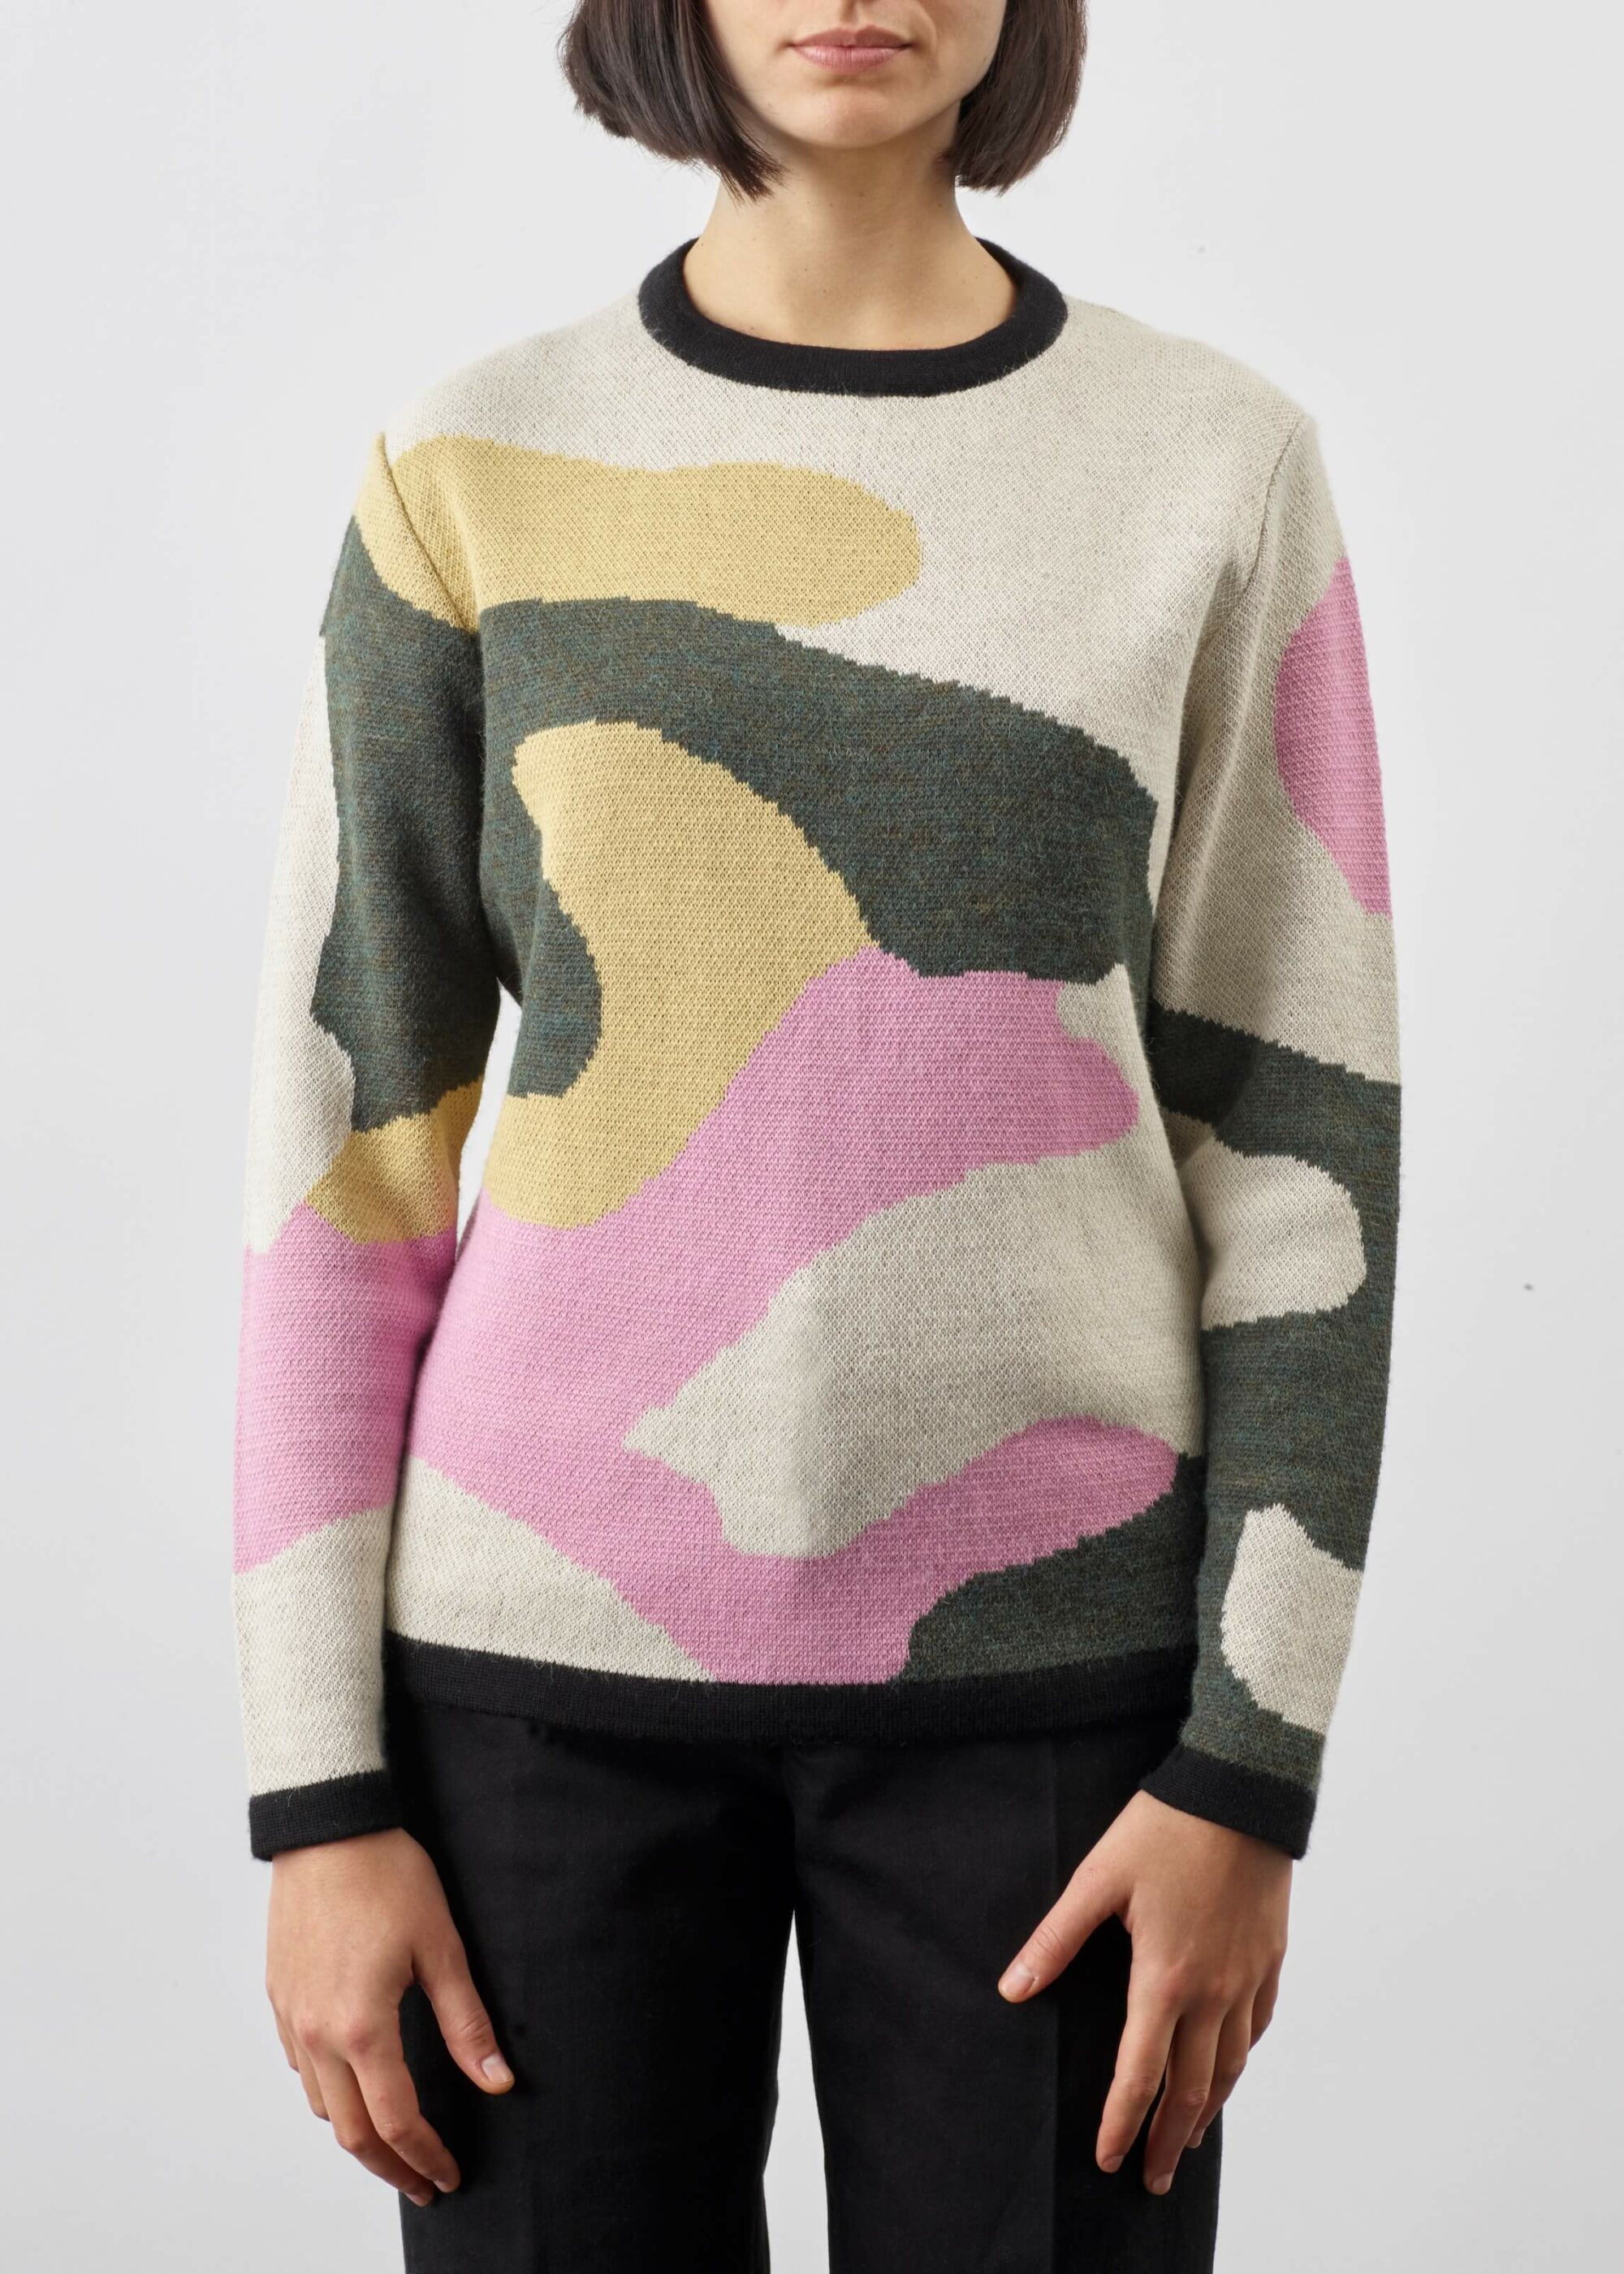 Product image for »Corbusier« Jacquard Sweater Baby Alpaca